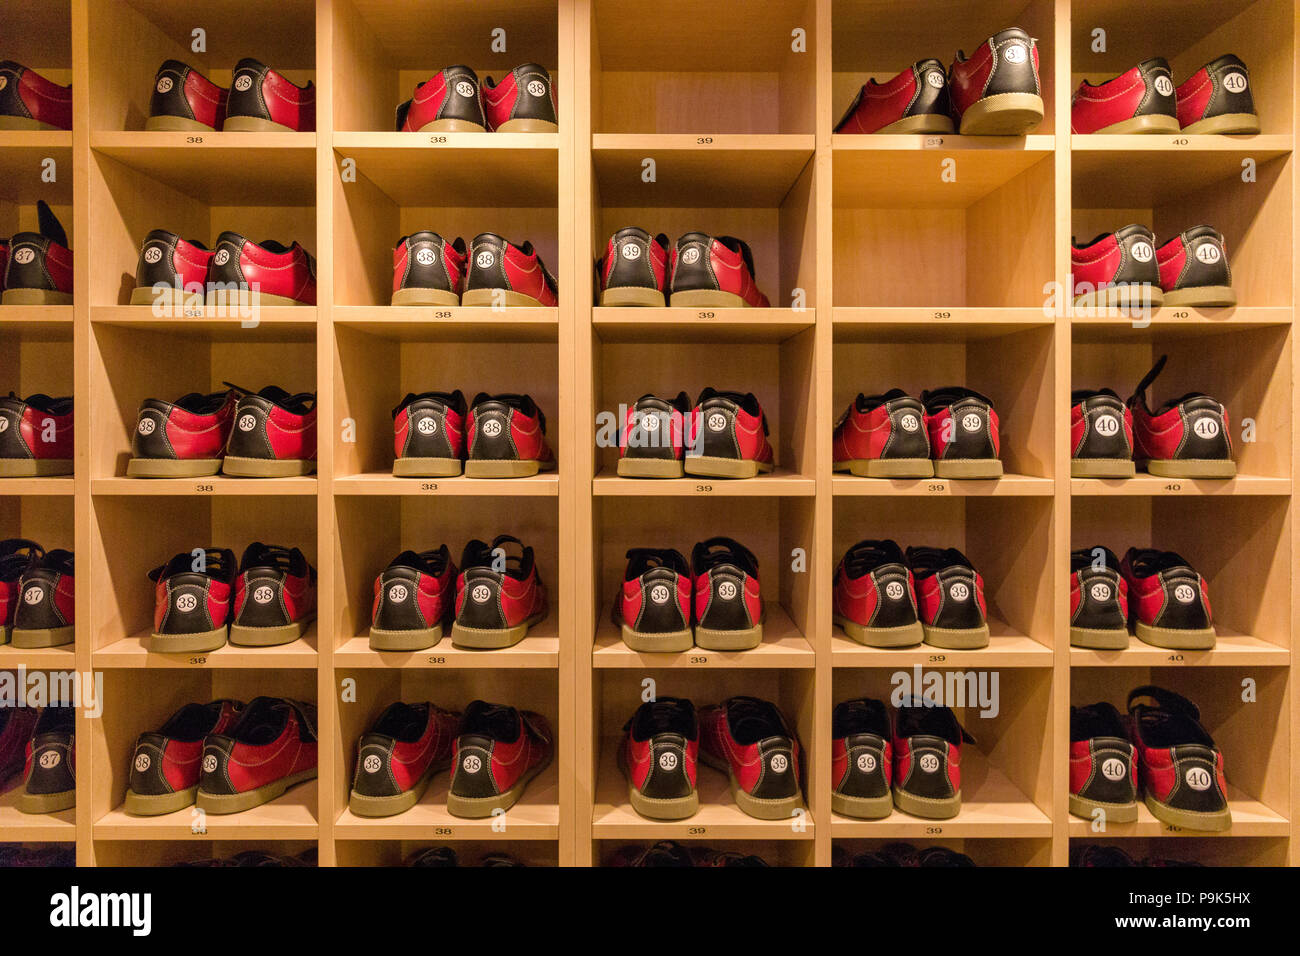 GOTHENBURG, SWEDEN - JULY 18 2018: Shoe rack filled with red and black rental bowling shoes Stock Photo